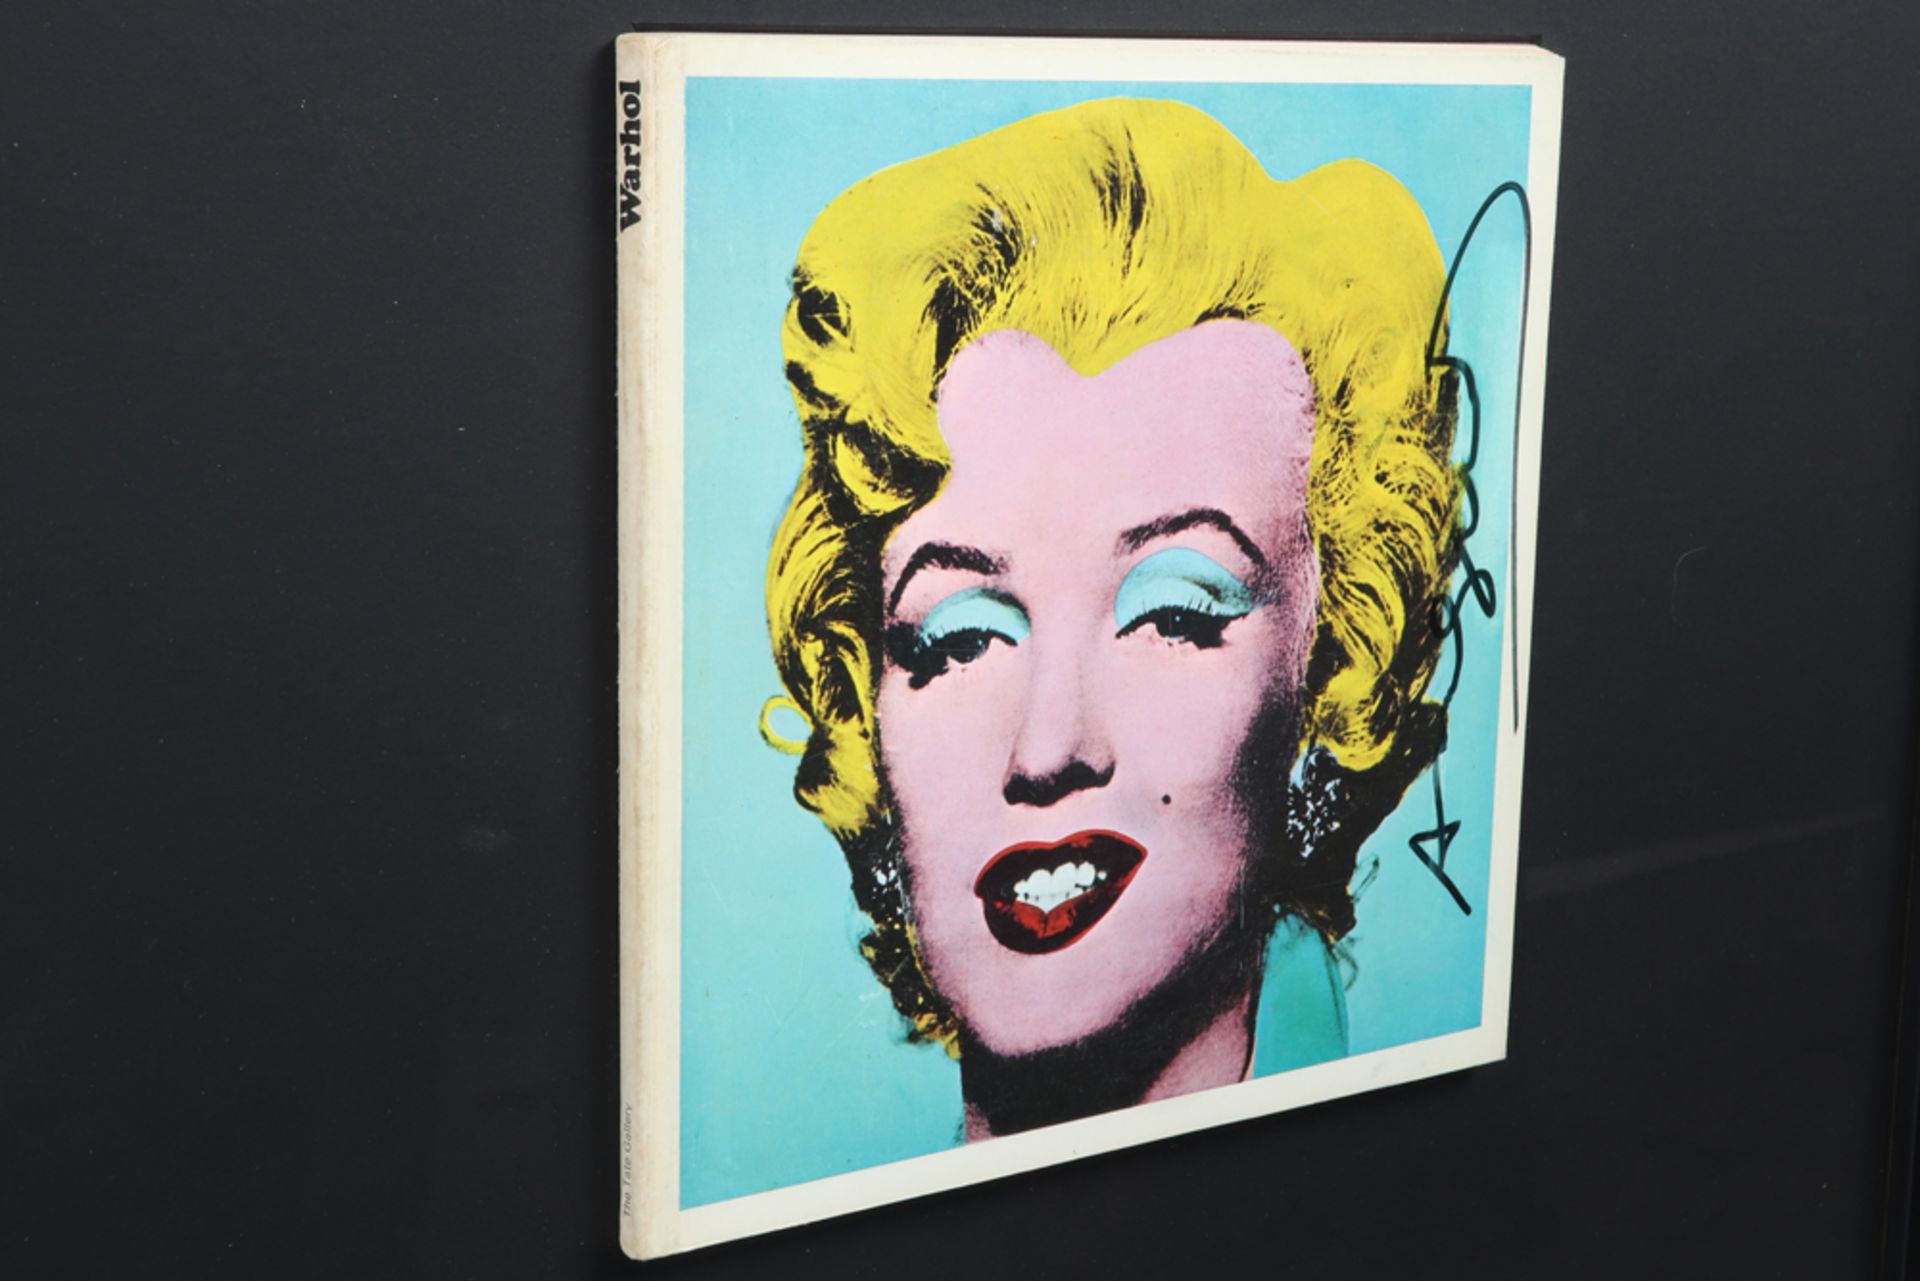 framed Andy Warhol signed catalogue of the 1971 Tate Gallery Exhibition with "Marilyn Monroe" on the - Image 2 of 4